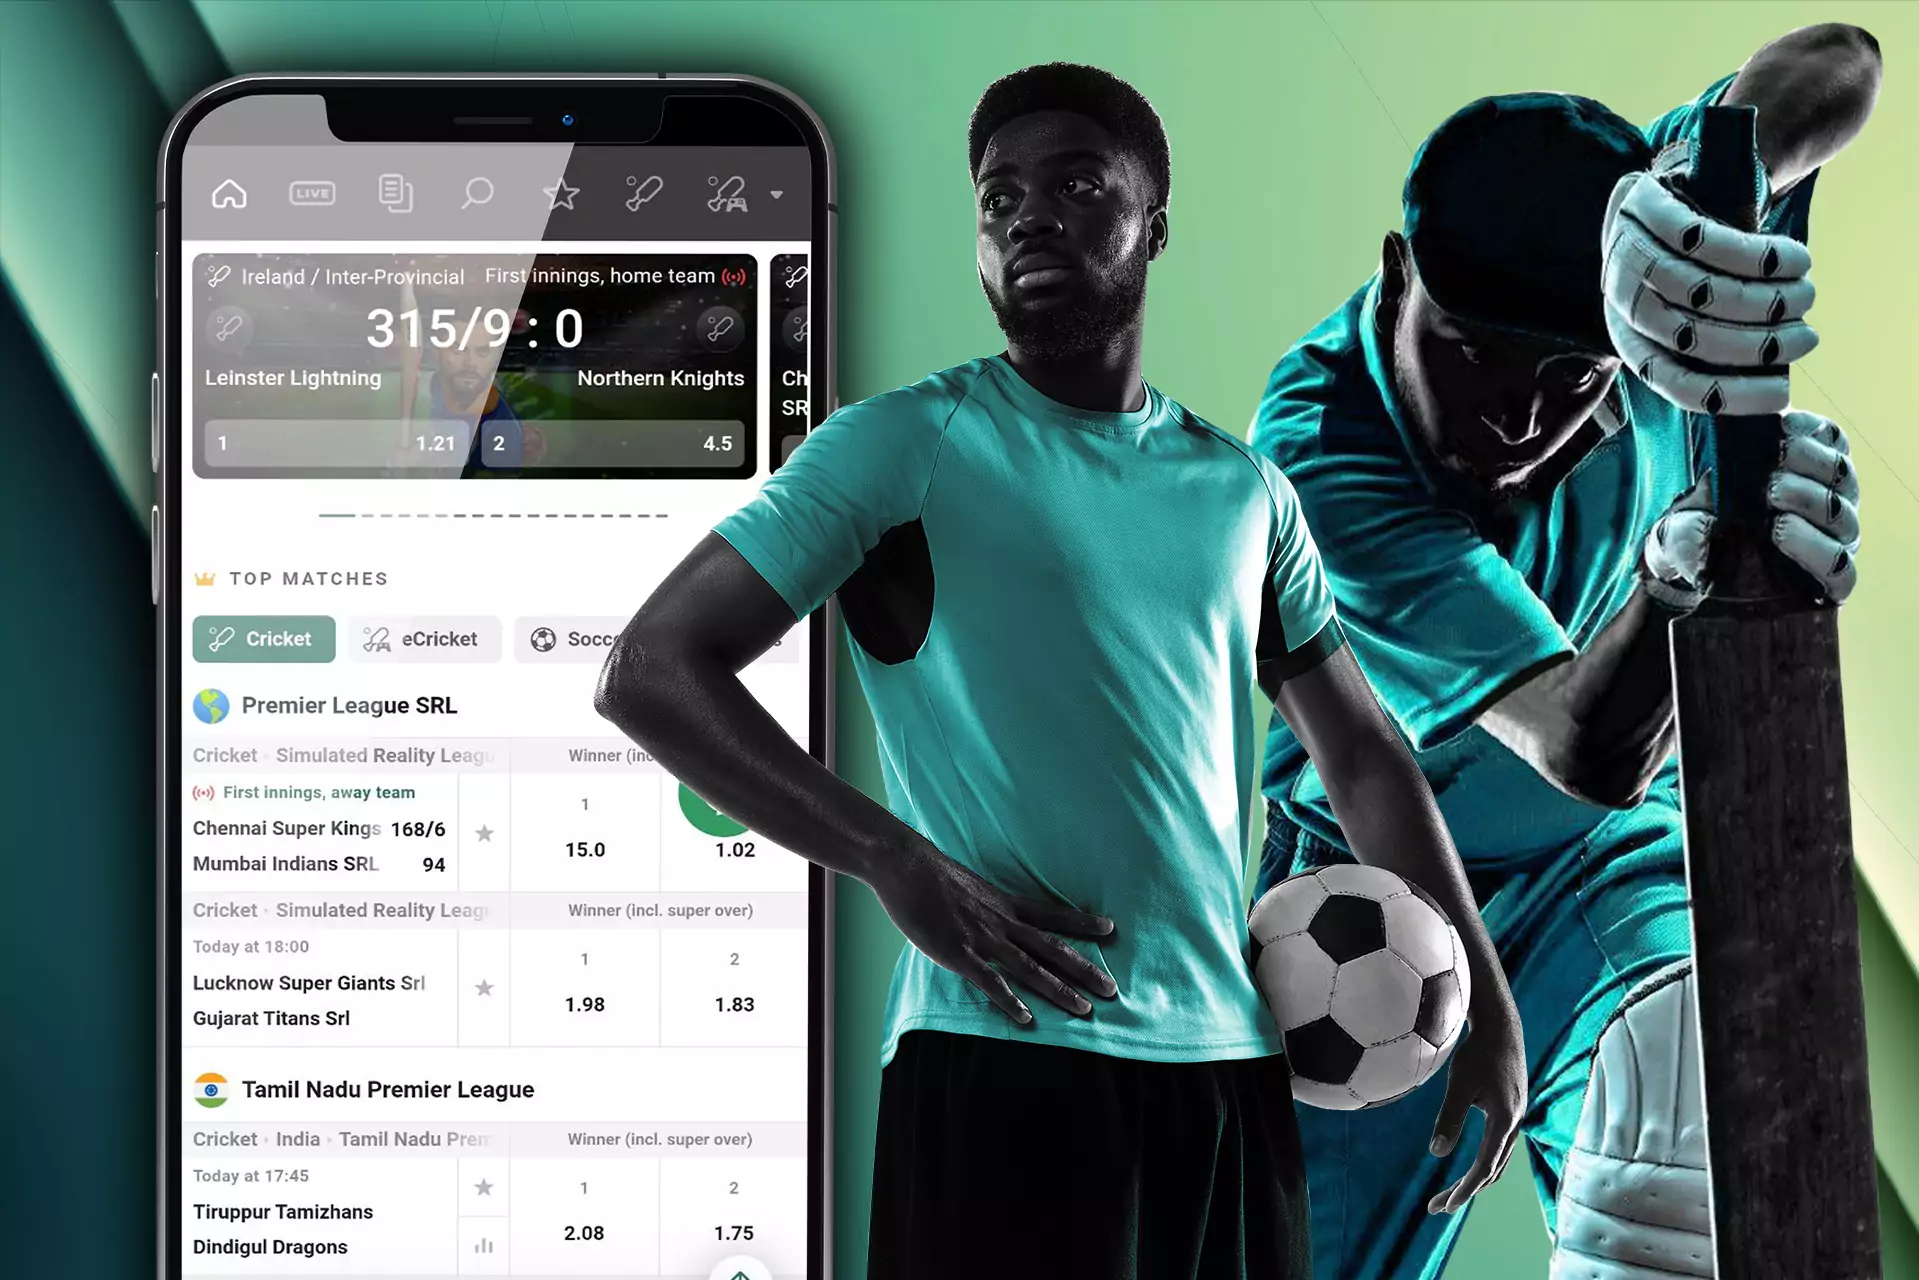 You can bet on cricket and other sports in the Rajbet app.